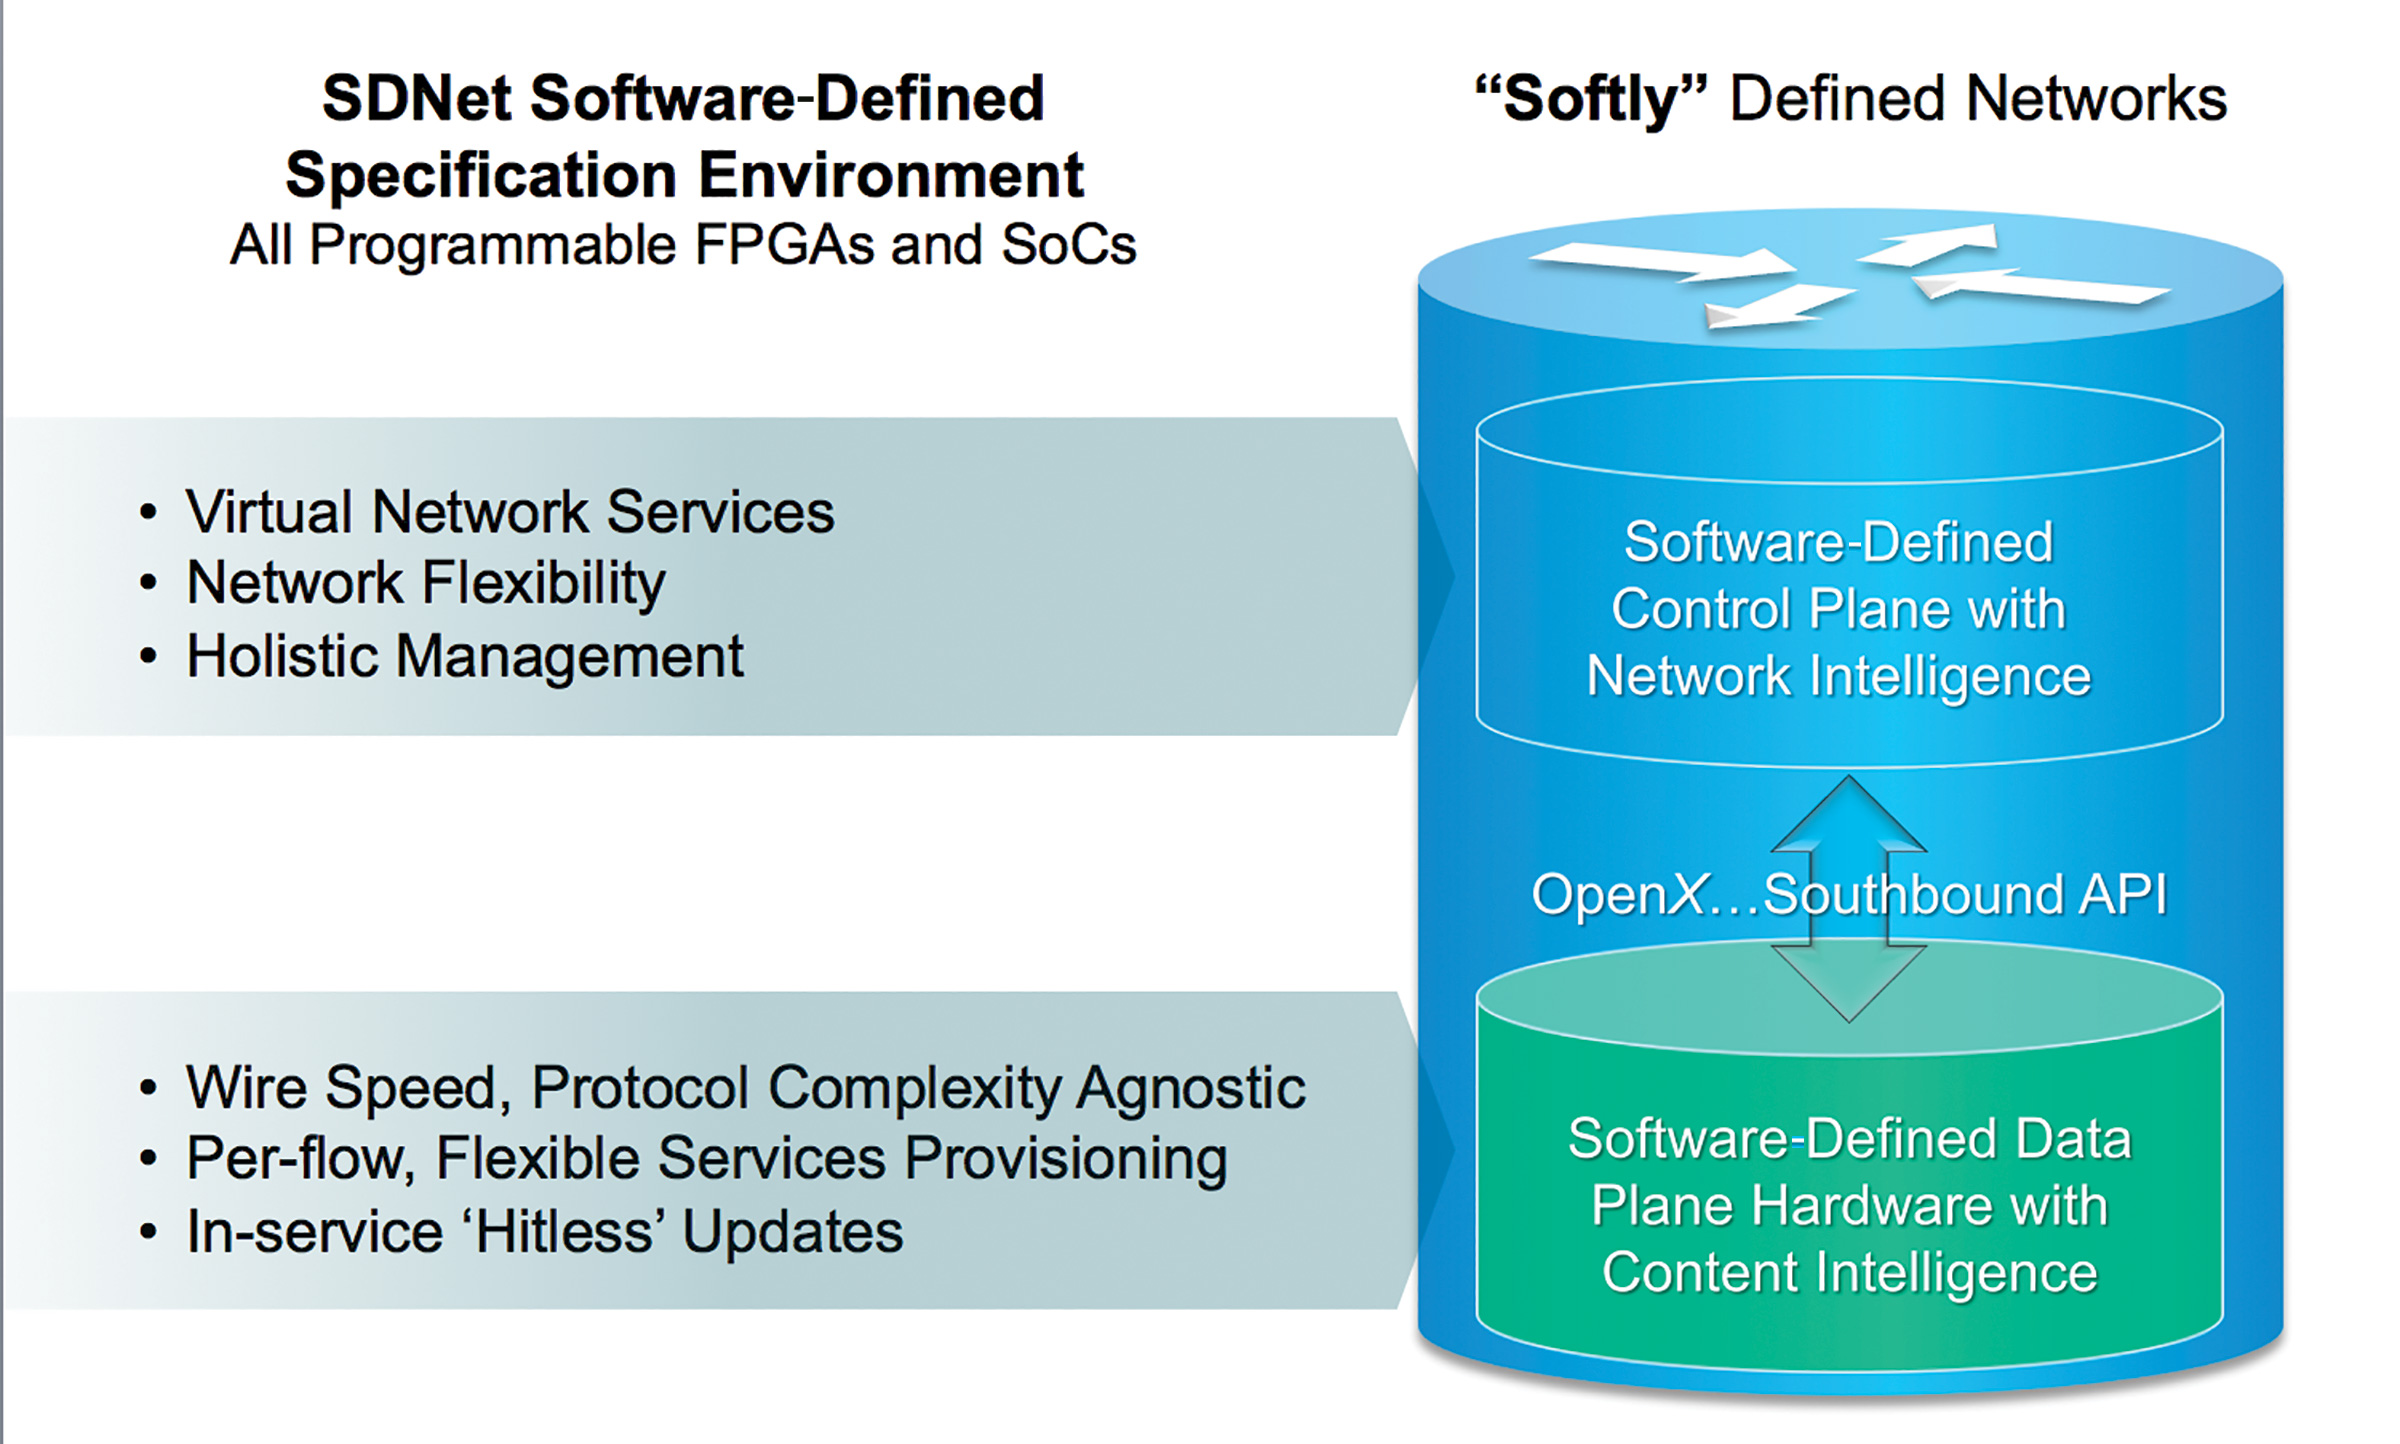 Figure 2 - SDNet brings flexibility and automation to the data plane, enabling a softly defined network approach for the design and upgrade of next-generation networks